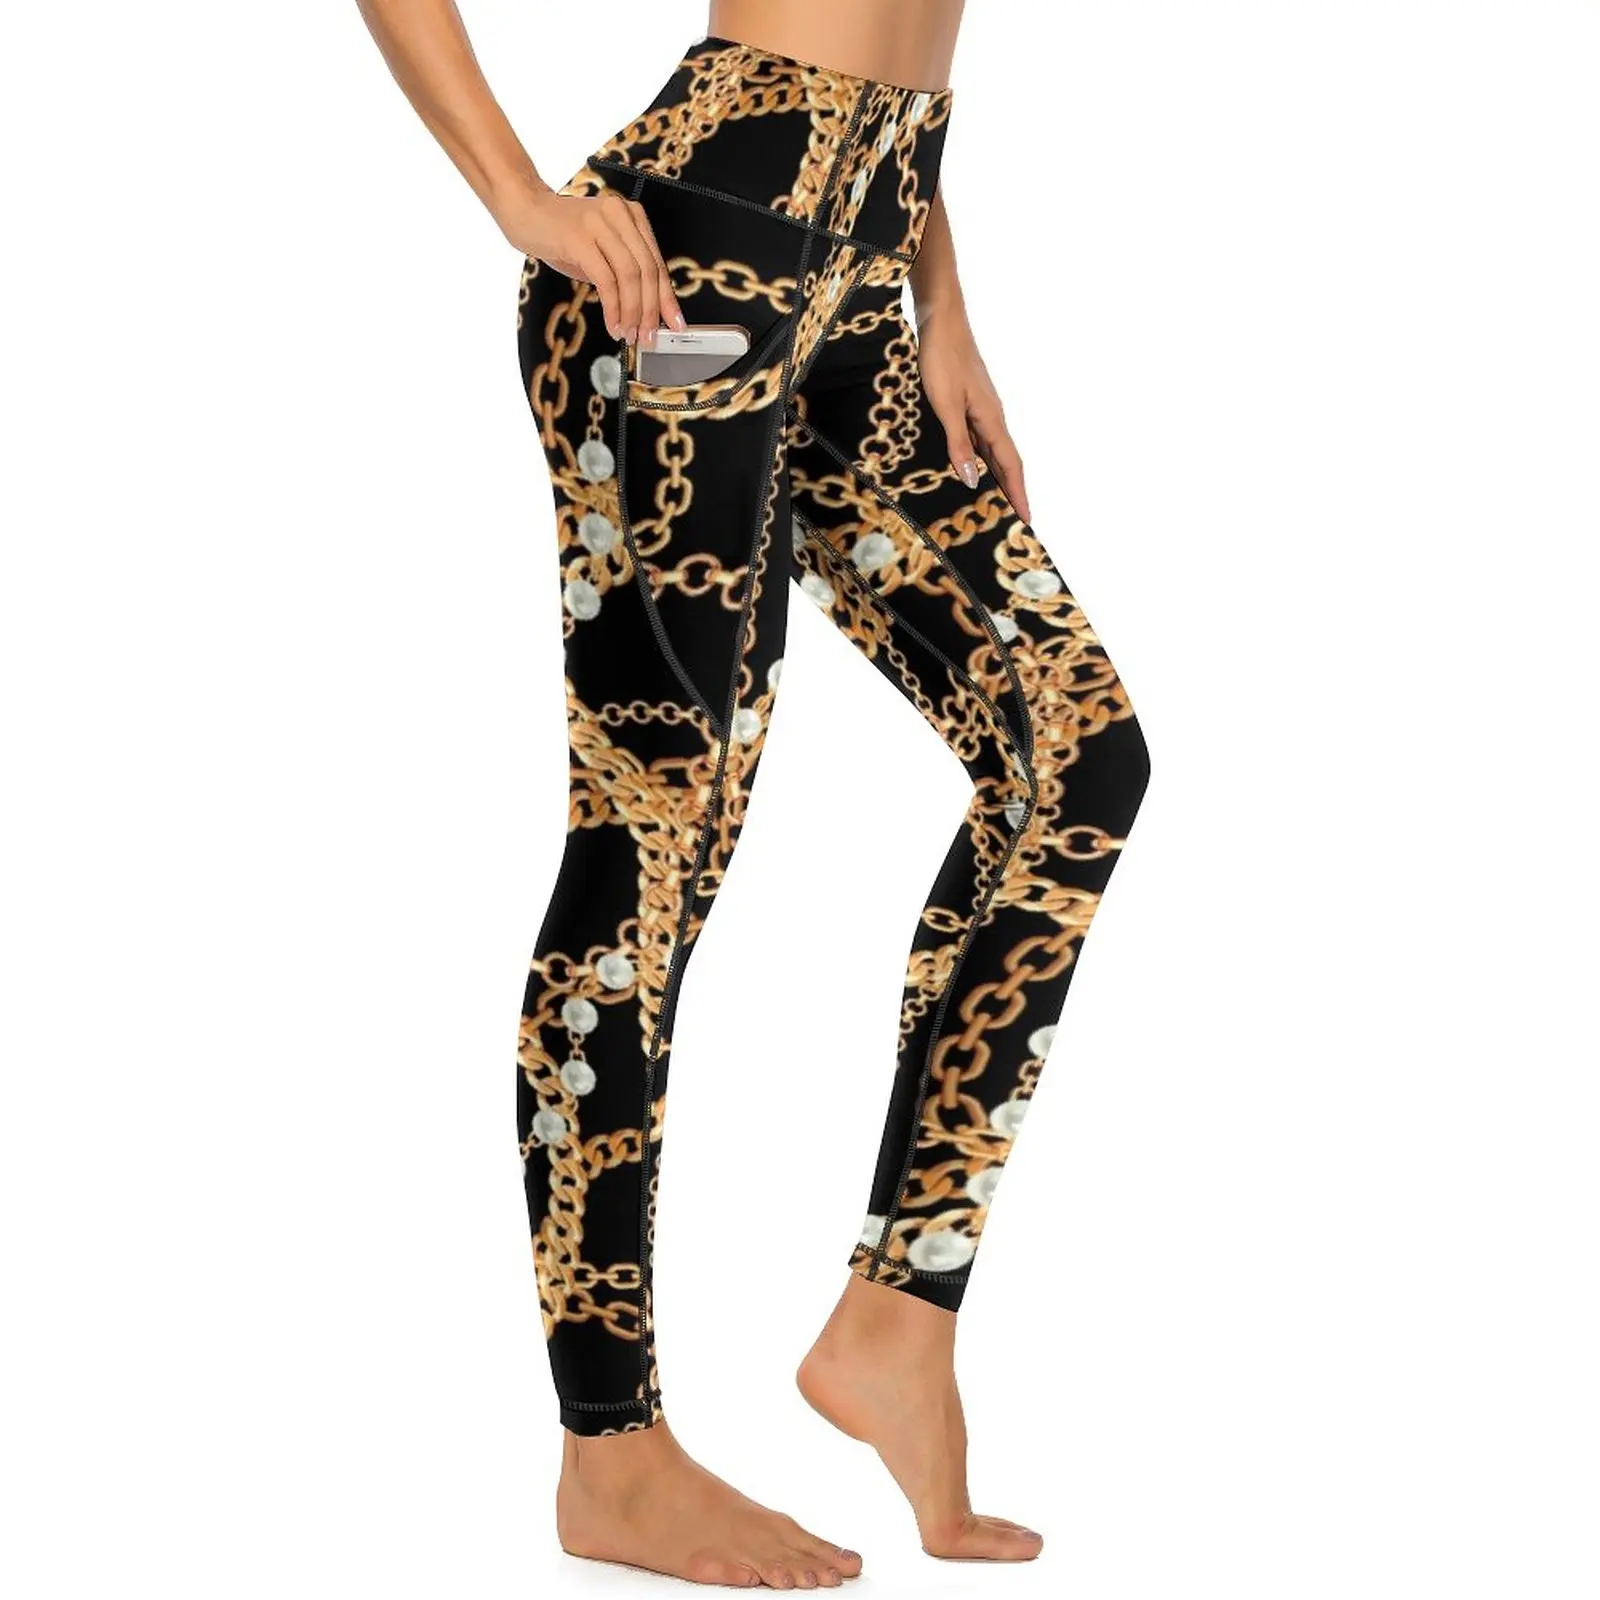 

Chain Print And Pearls Leggings Gold Link Fitness Yoga Pants Lady High Waist Vintage Leggins Sexy Stretch Custom Sports Tights